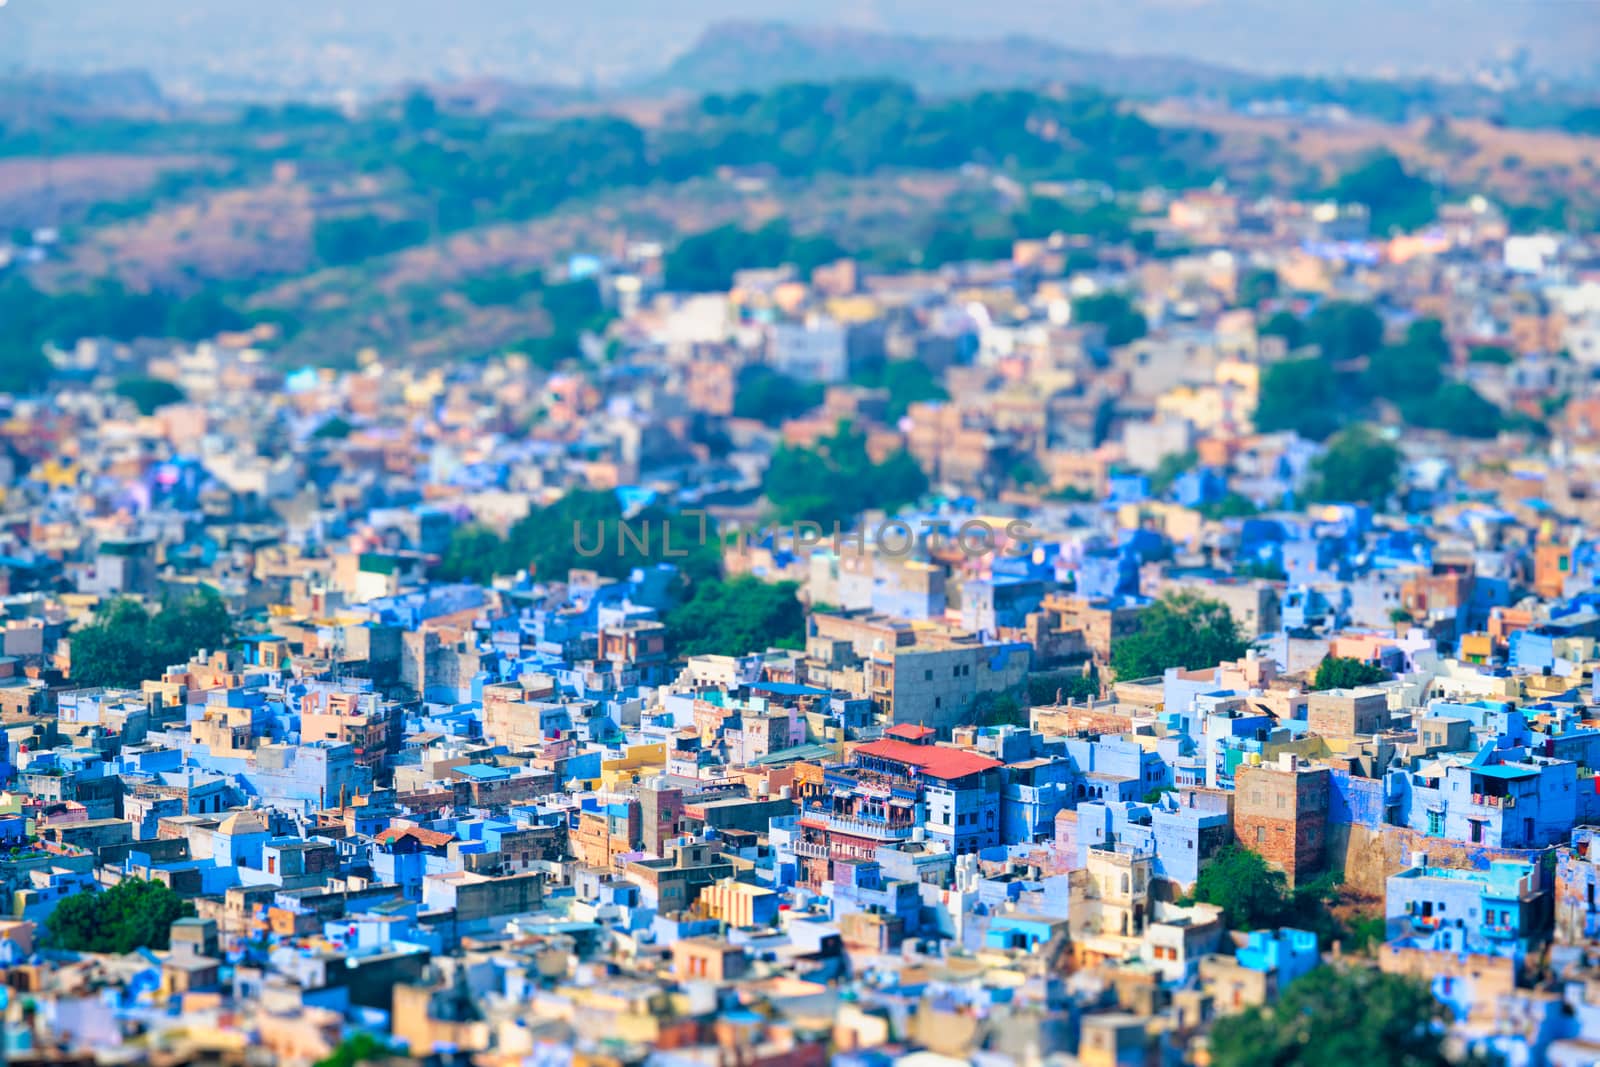 Aerial view of Jodhpur, also known as Blue City due to the vivid blue-painted Brahmin houses around Mehrangarh Fort. Jodphur, Rajasthan, India. Tilt shift miniature toy effect